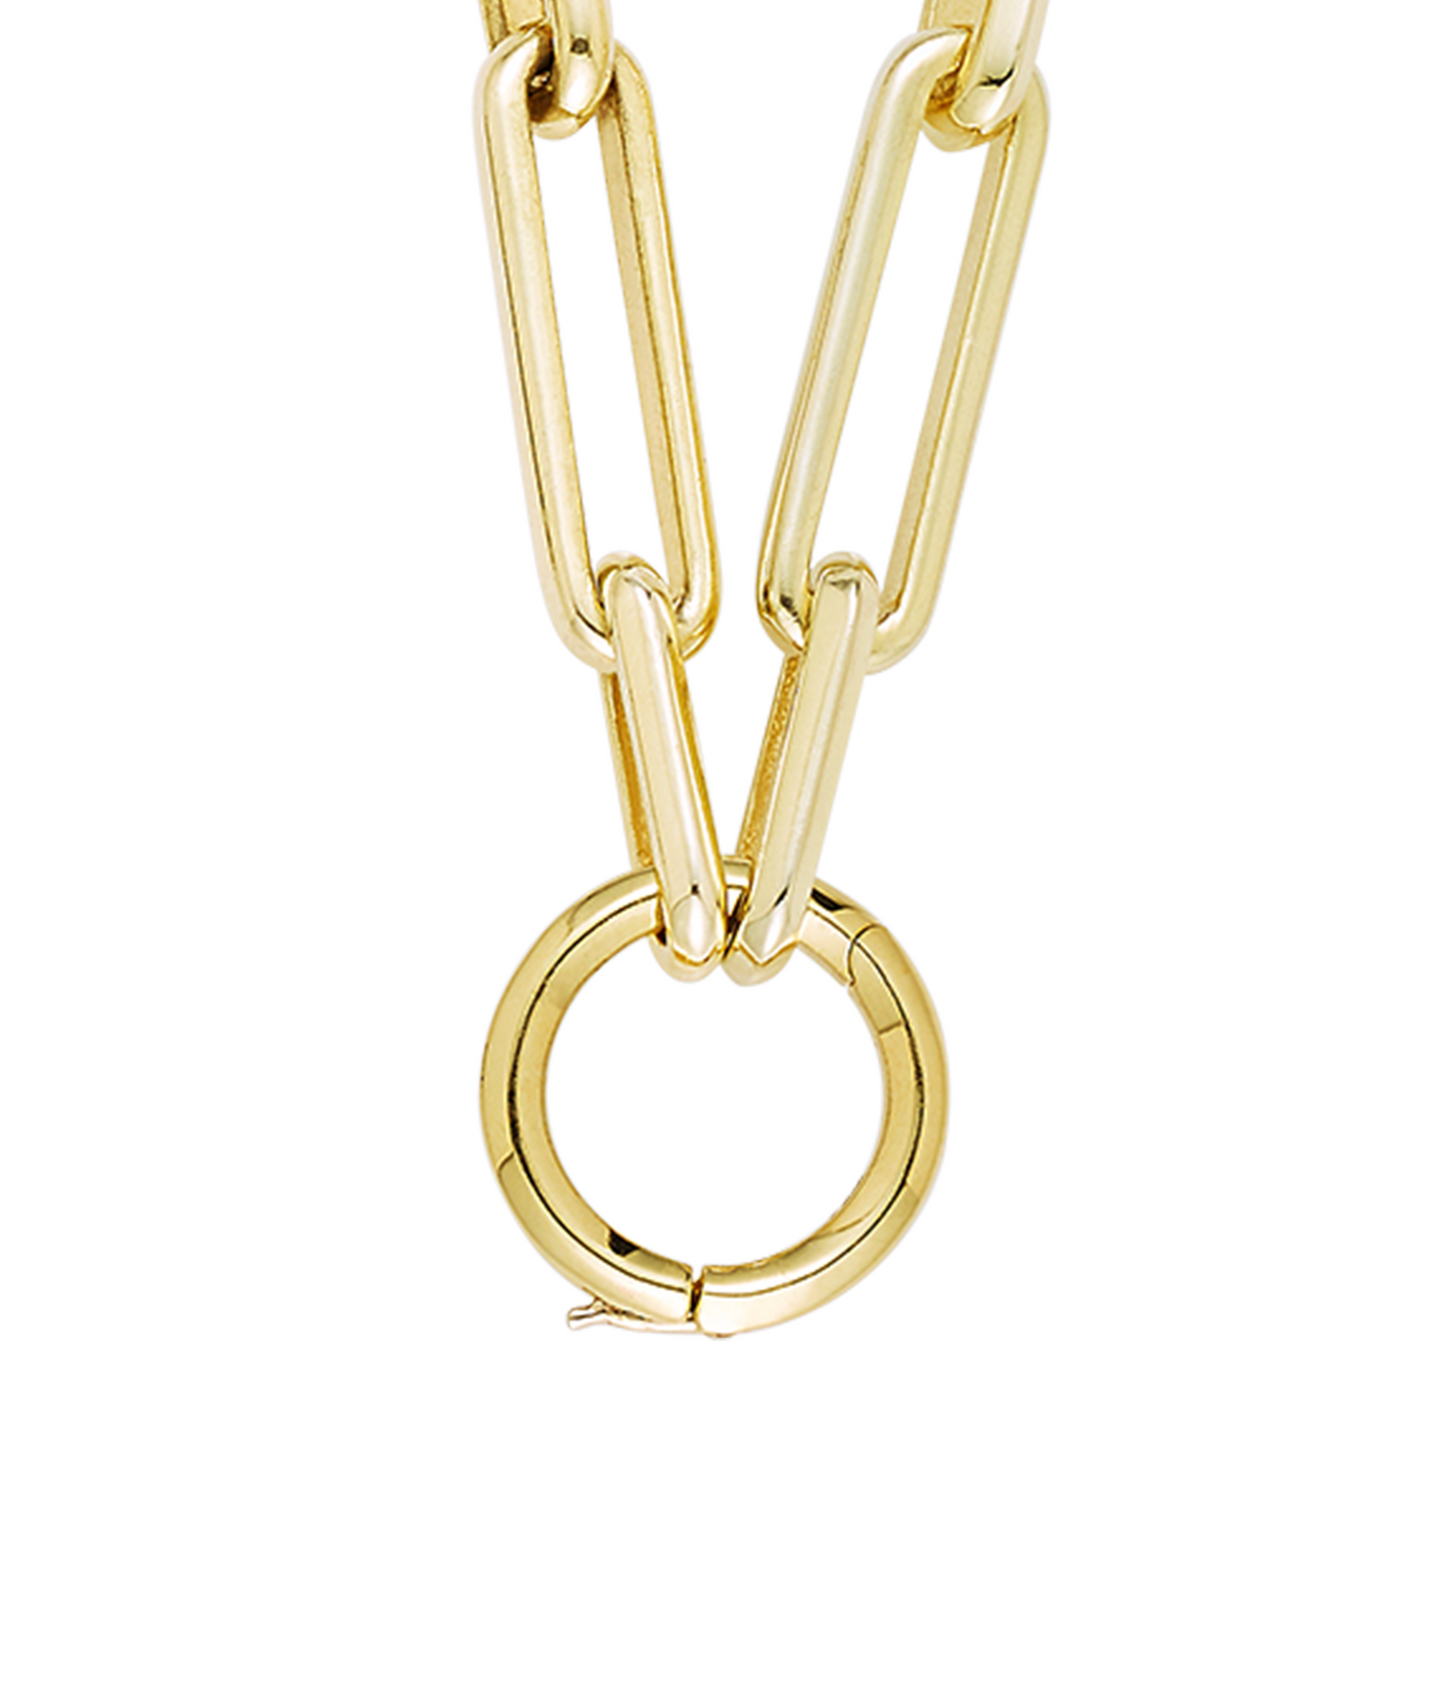 Gold link chain - hoop clasp